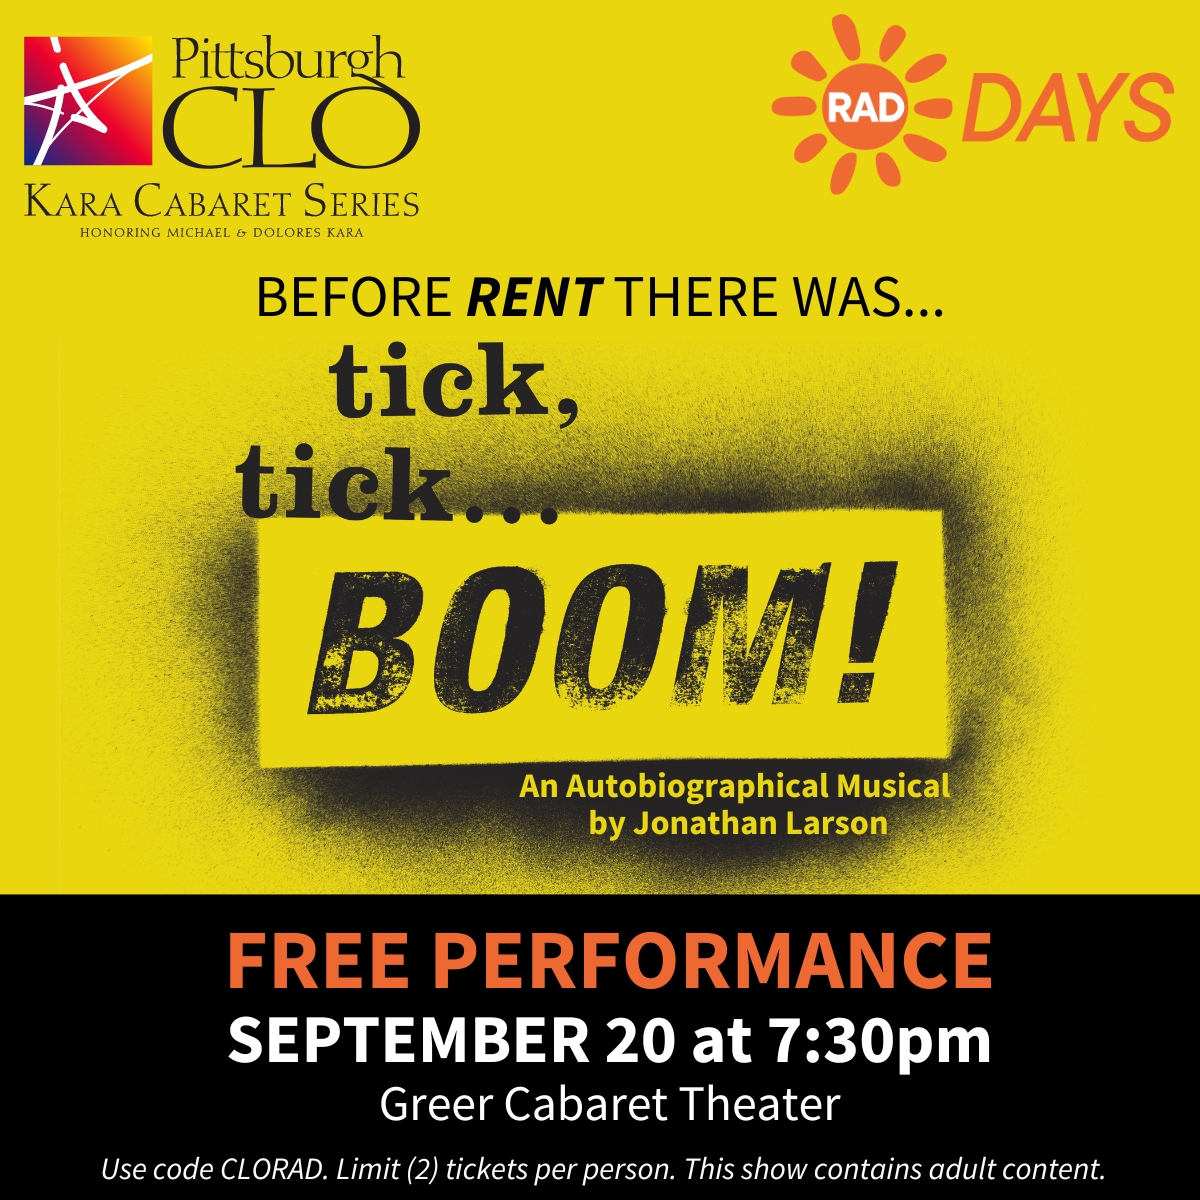 Before RENT there was... tick, tick...BOOM! An Autobiographical Musical by Jonathan Larson. FREE PERFORMANCE SEPTEMBER 20 at 7:30pm Greer Cabaret Theater. Use code CLORAD. Limit (2) tickets per person. This show contains adult content.